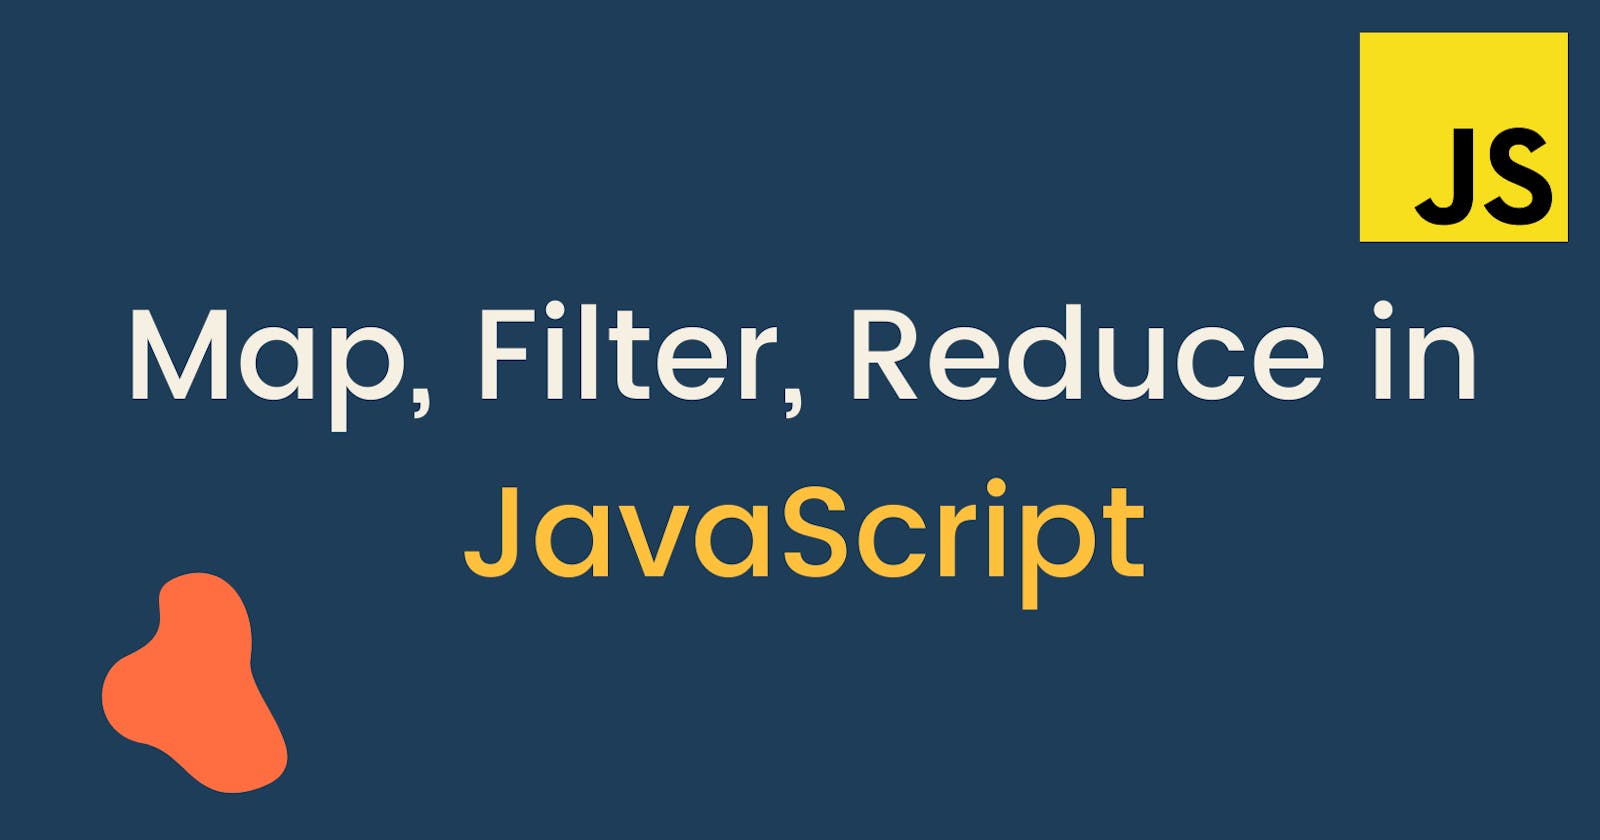 Map, Filter, and Reduce in JavaScript under 5 minutes